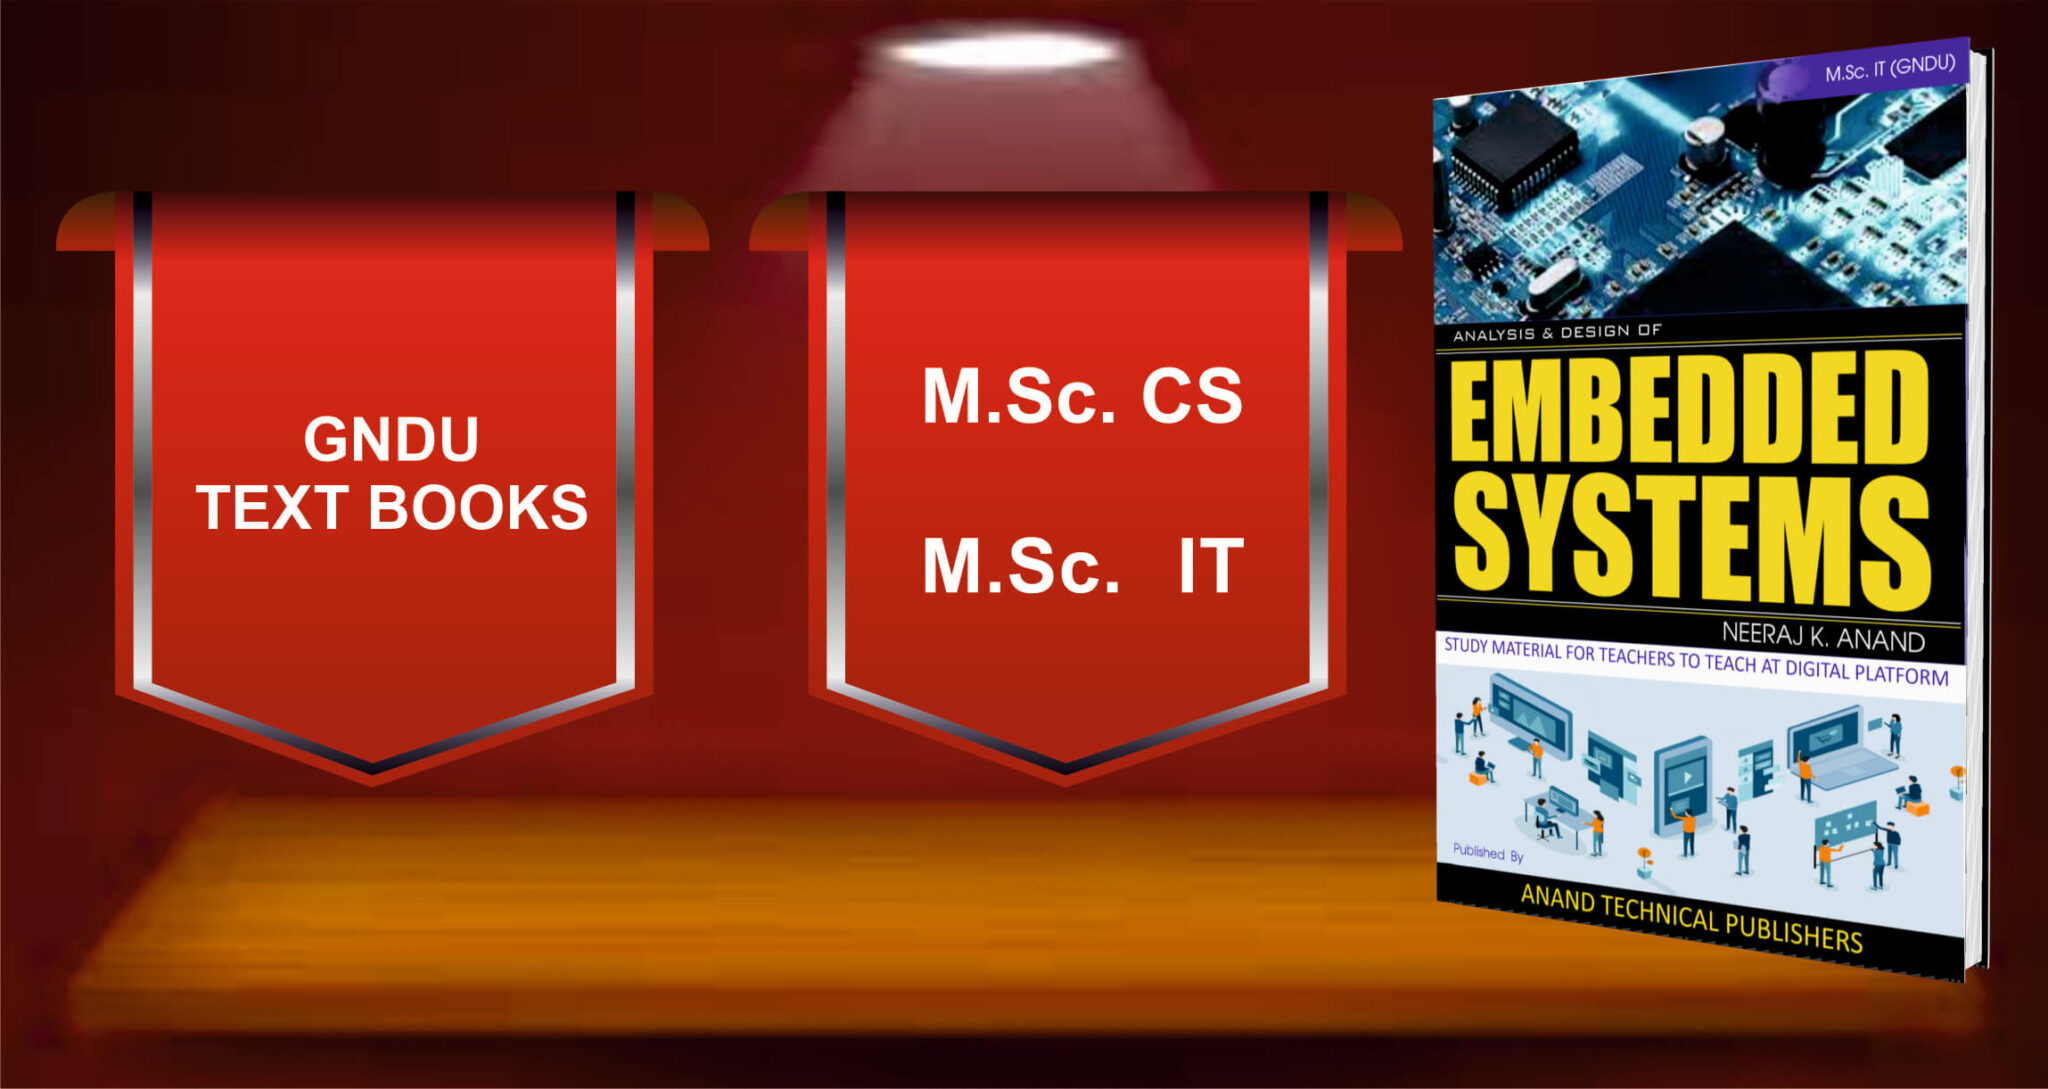 Analysis & Design of Embedded Systems|8051 Microcontroller Architectures|E-book GNDU Msc IT Study Material Lecture Notes by Neeraj K Anand|Anand Technical Publishers